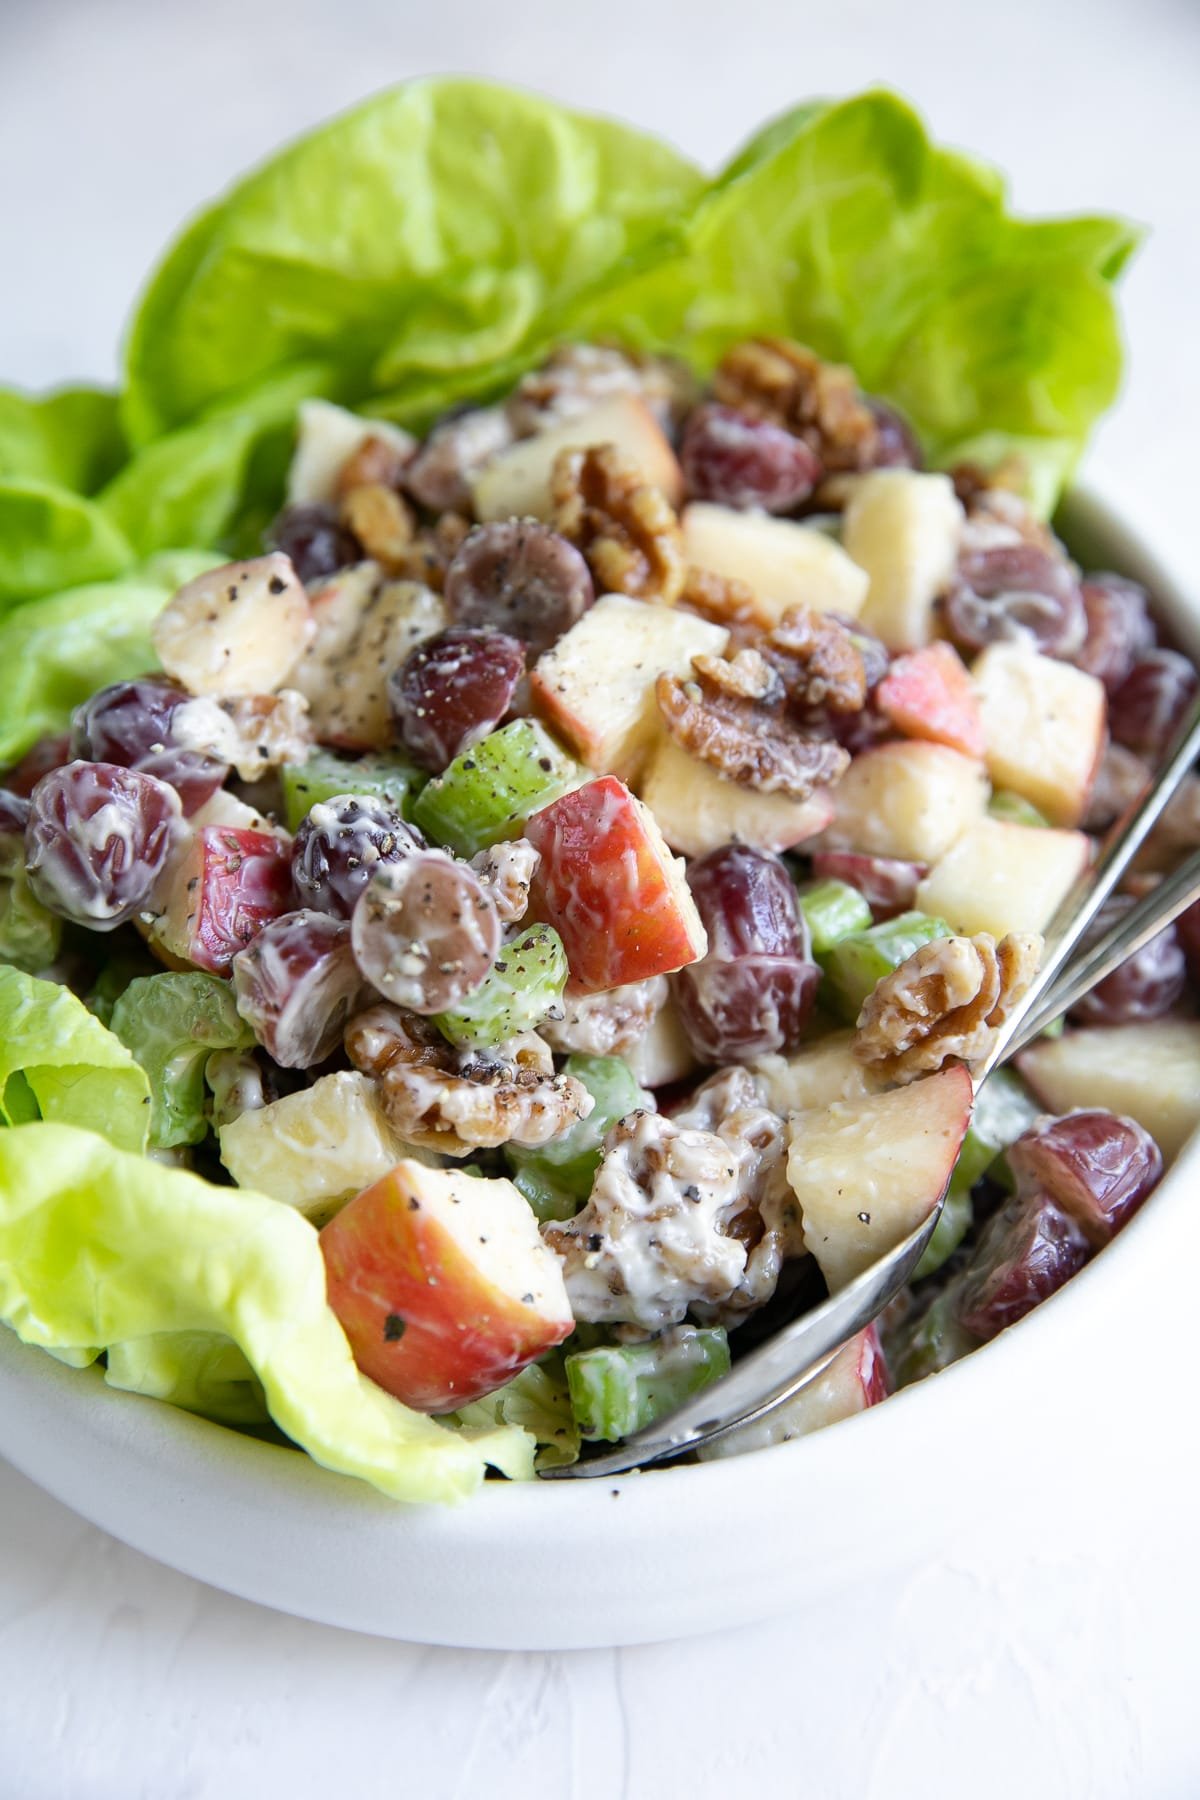 Waldorf salad made with apples, walnuts, grapes, and celery on a bed of lettuce in a white serving bowl.